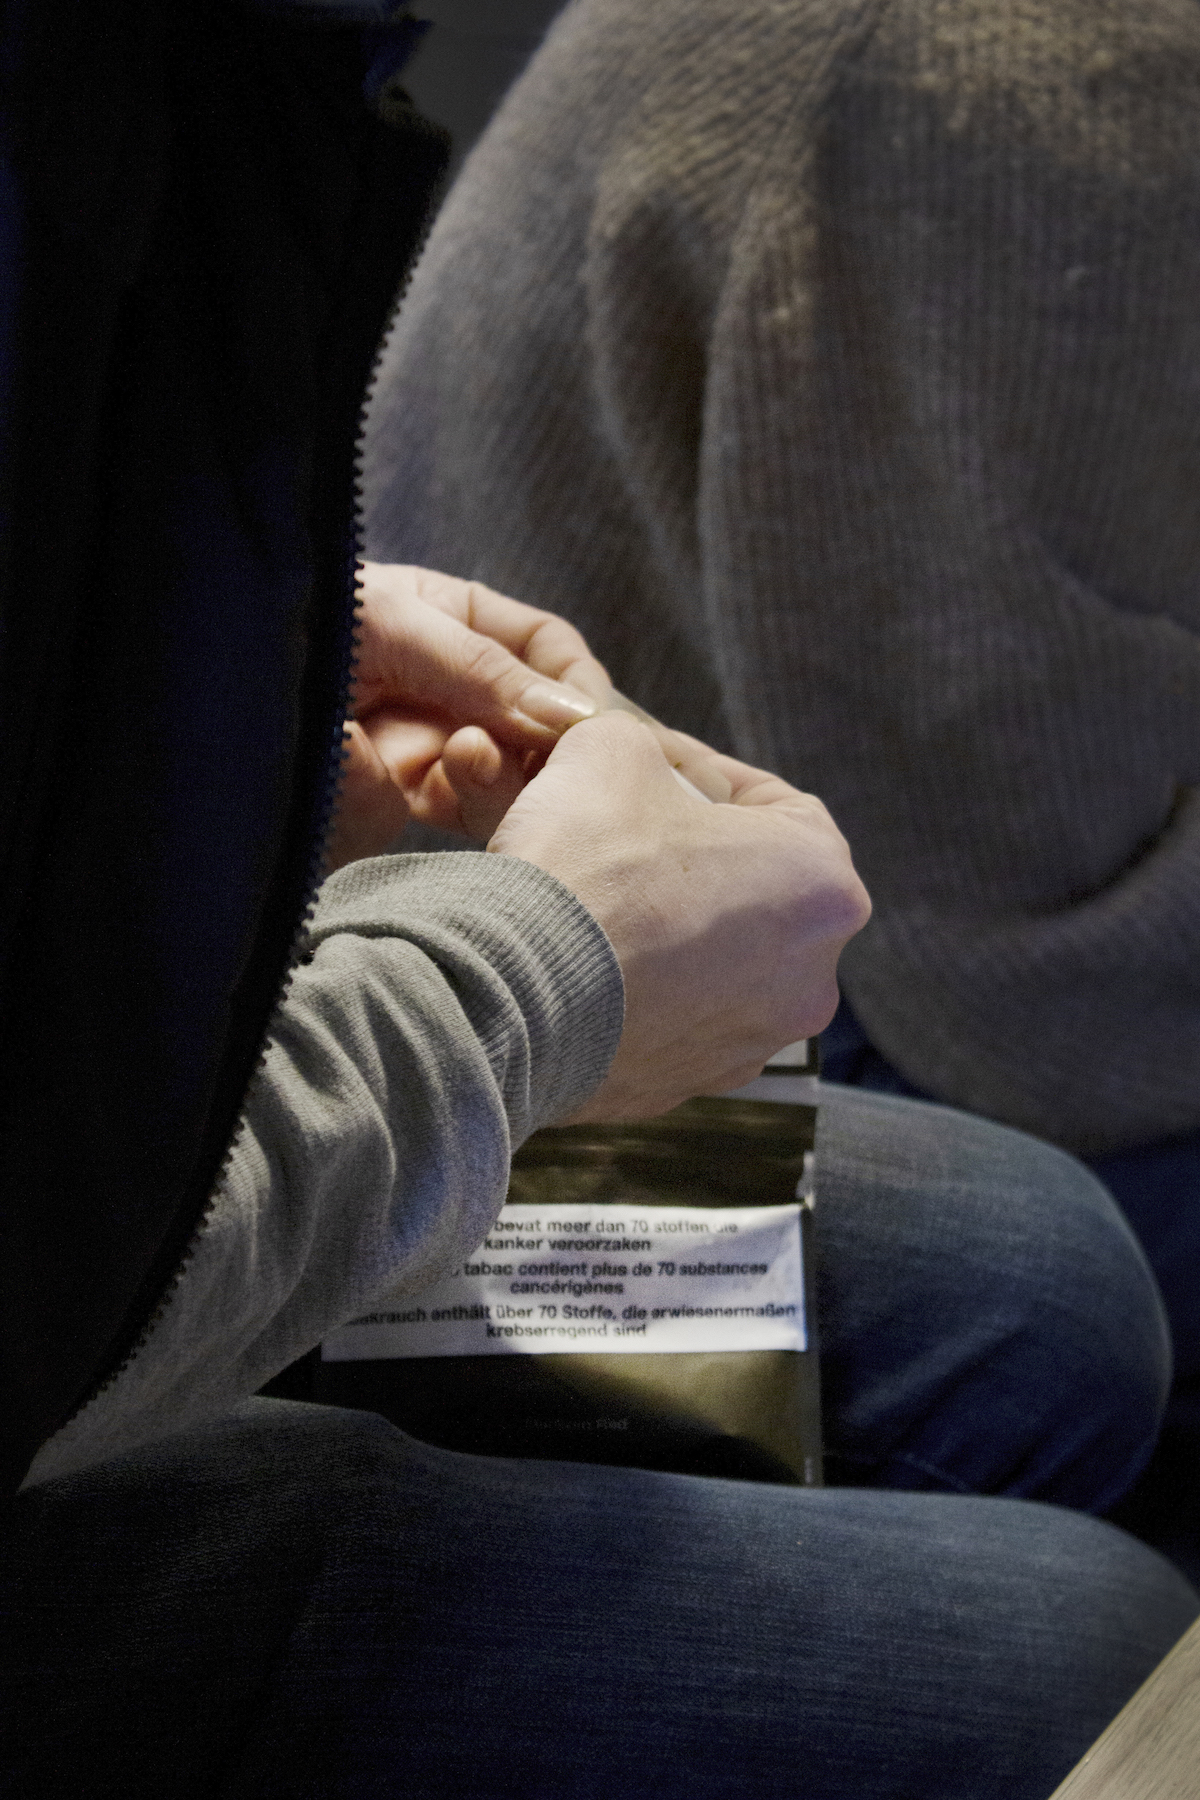 Transit, Brussels – closeup of a man's hands rolling a cigarette. He is wearing a grey sweatshirt and blue jeans.